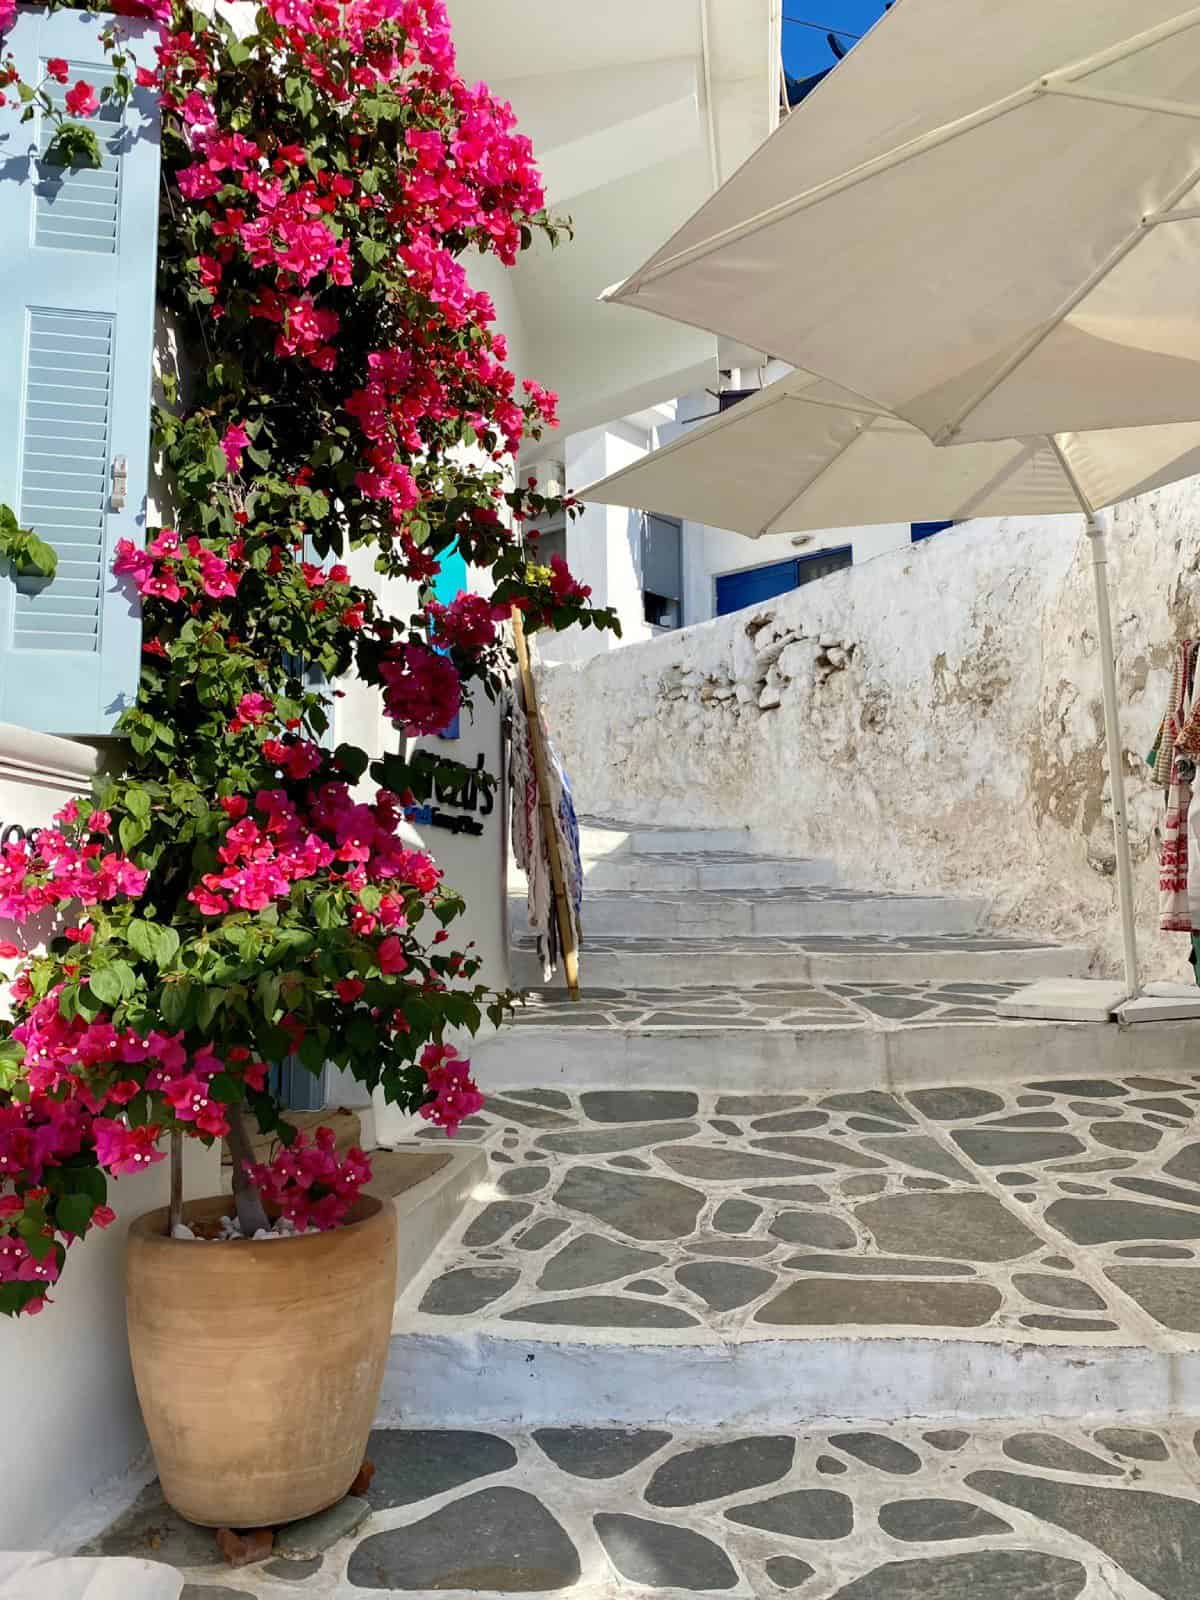 Things to do in Naxos Chora - wander the narrow alleyways of the old market